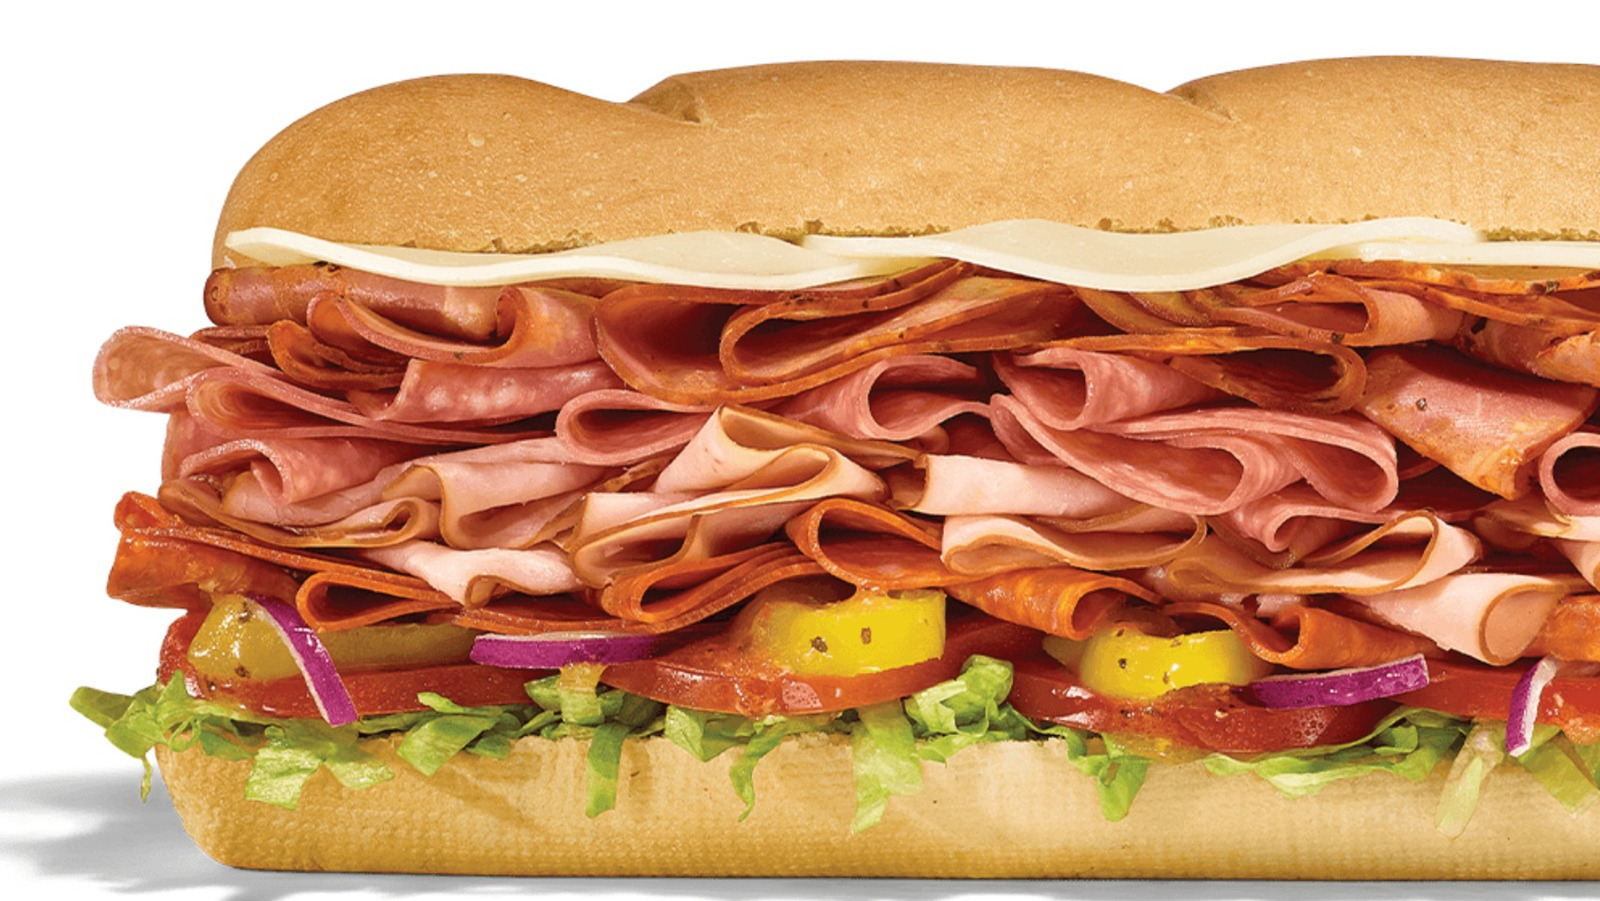 subway-just-upgraded-its-italian-subs-with-3-new-menu-options